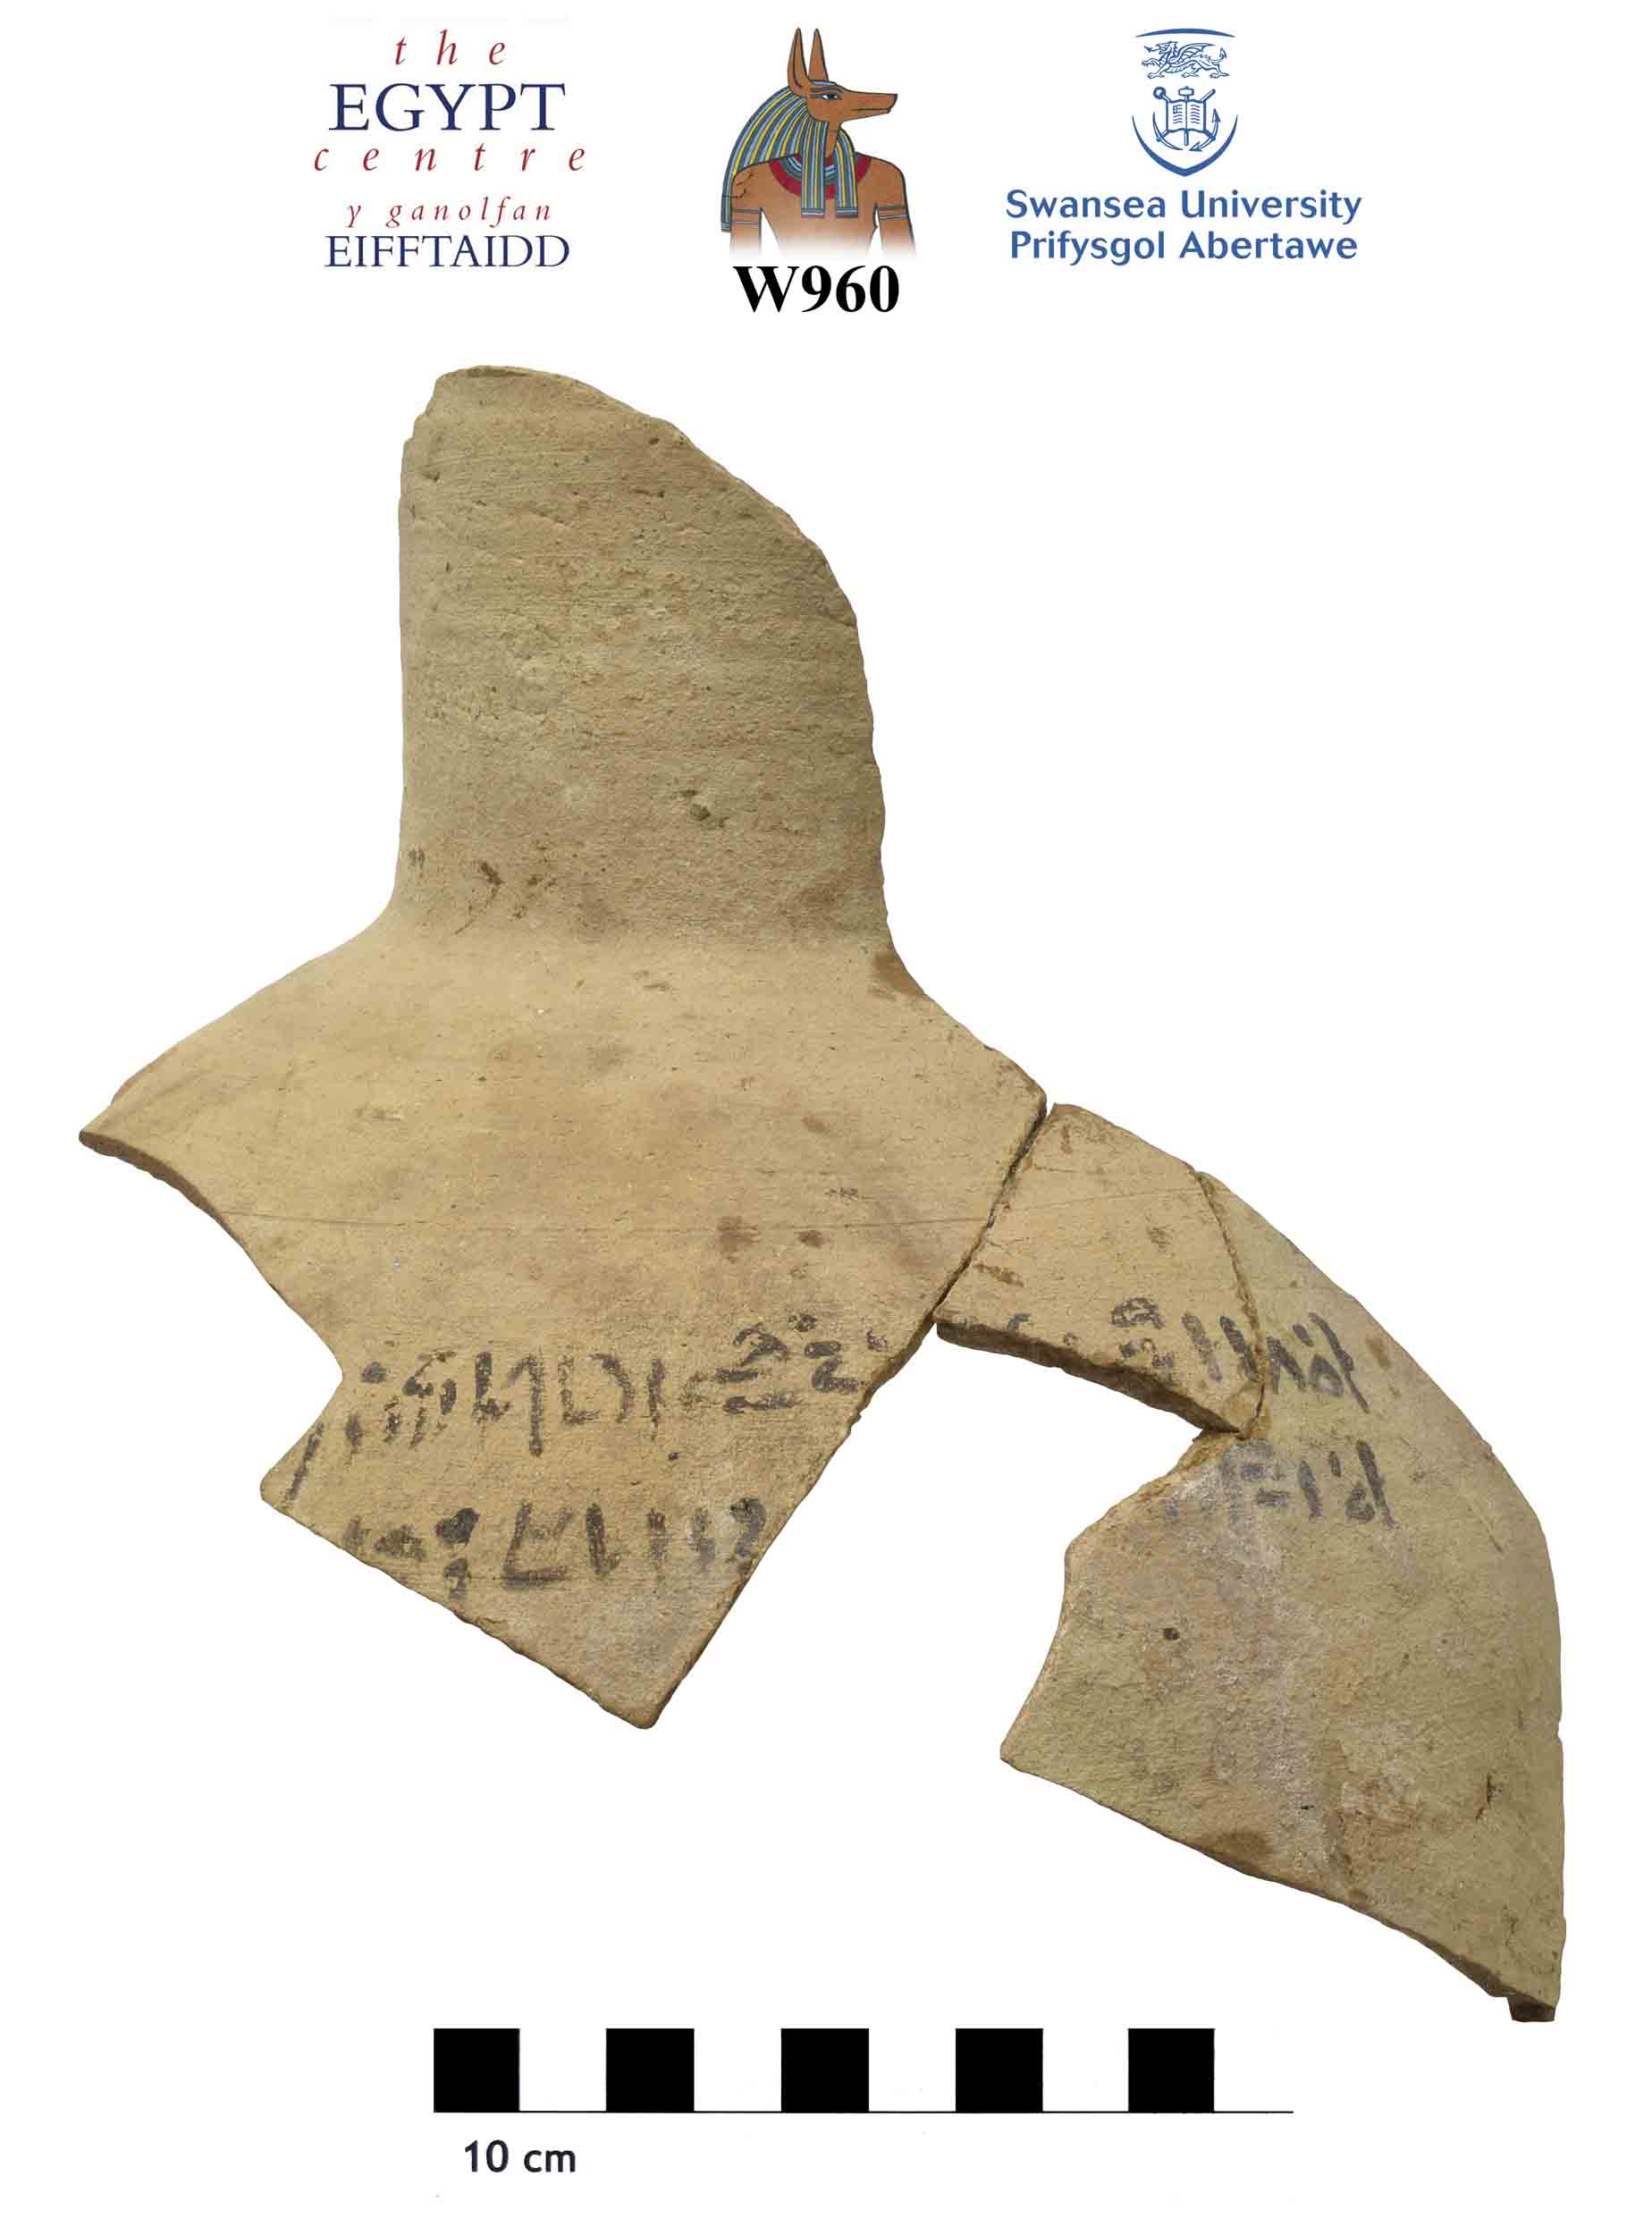 Image for: Fragment of a pottery vessel